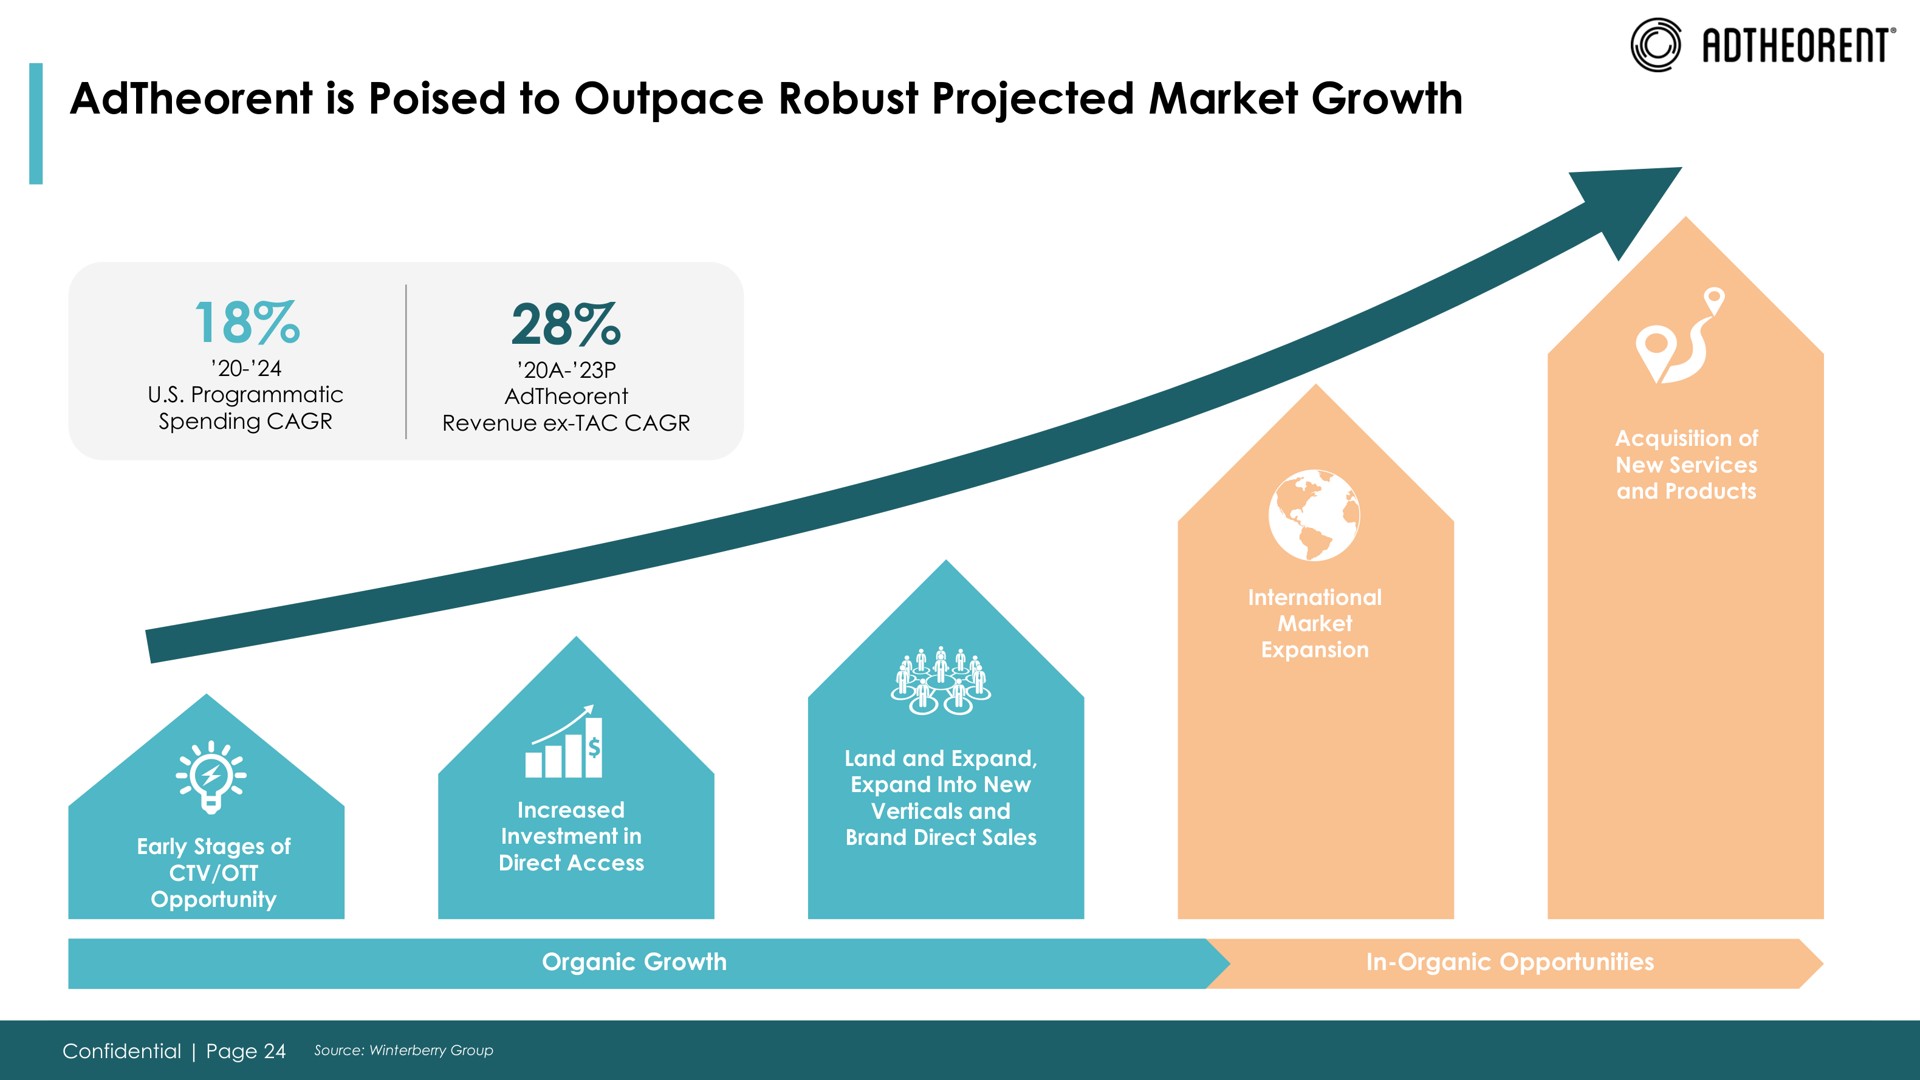 is poised to outpace robust projected market growth | Adtheorent